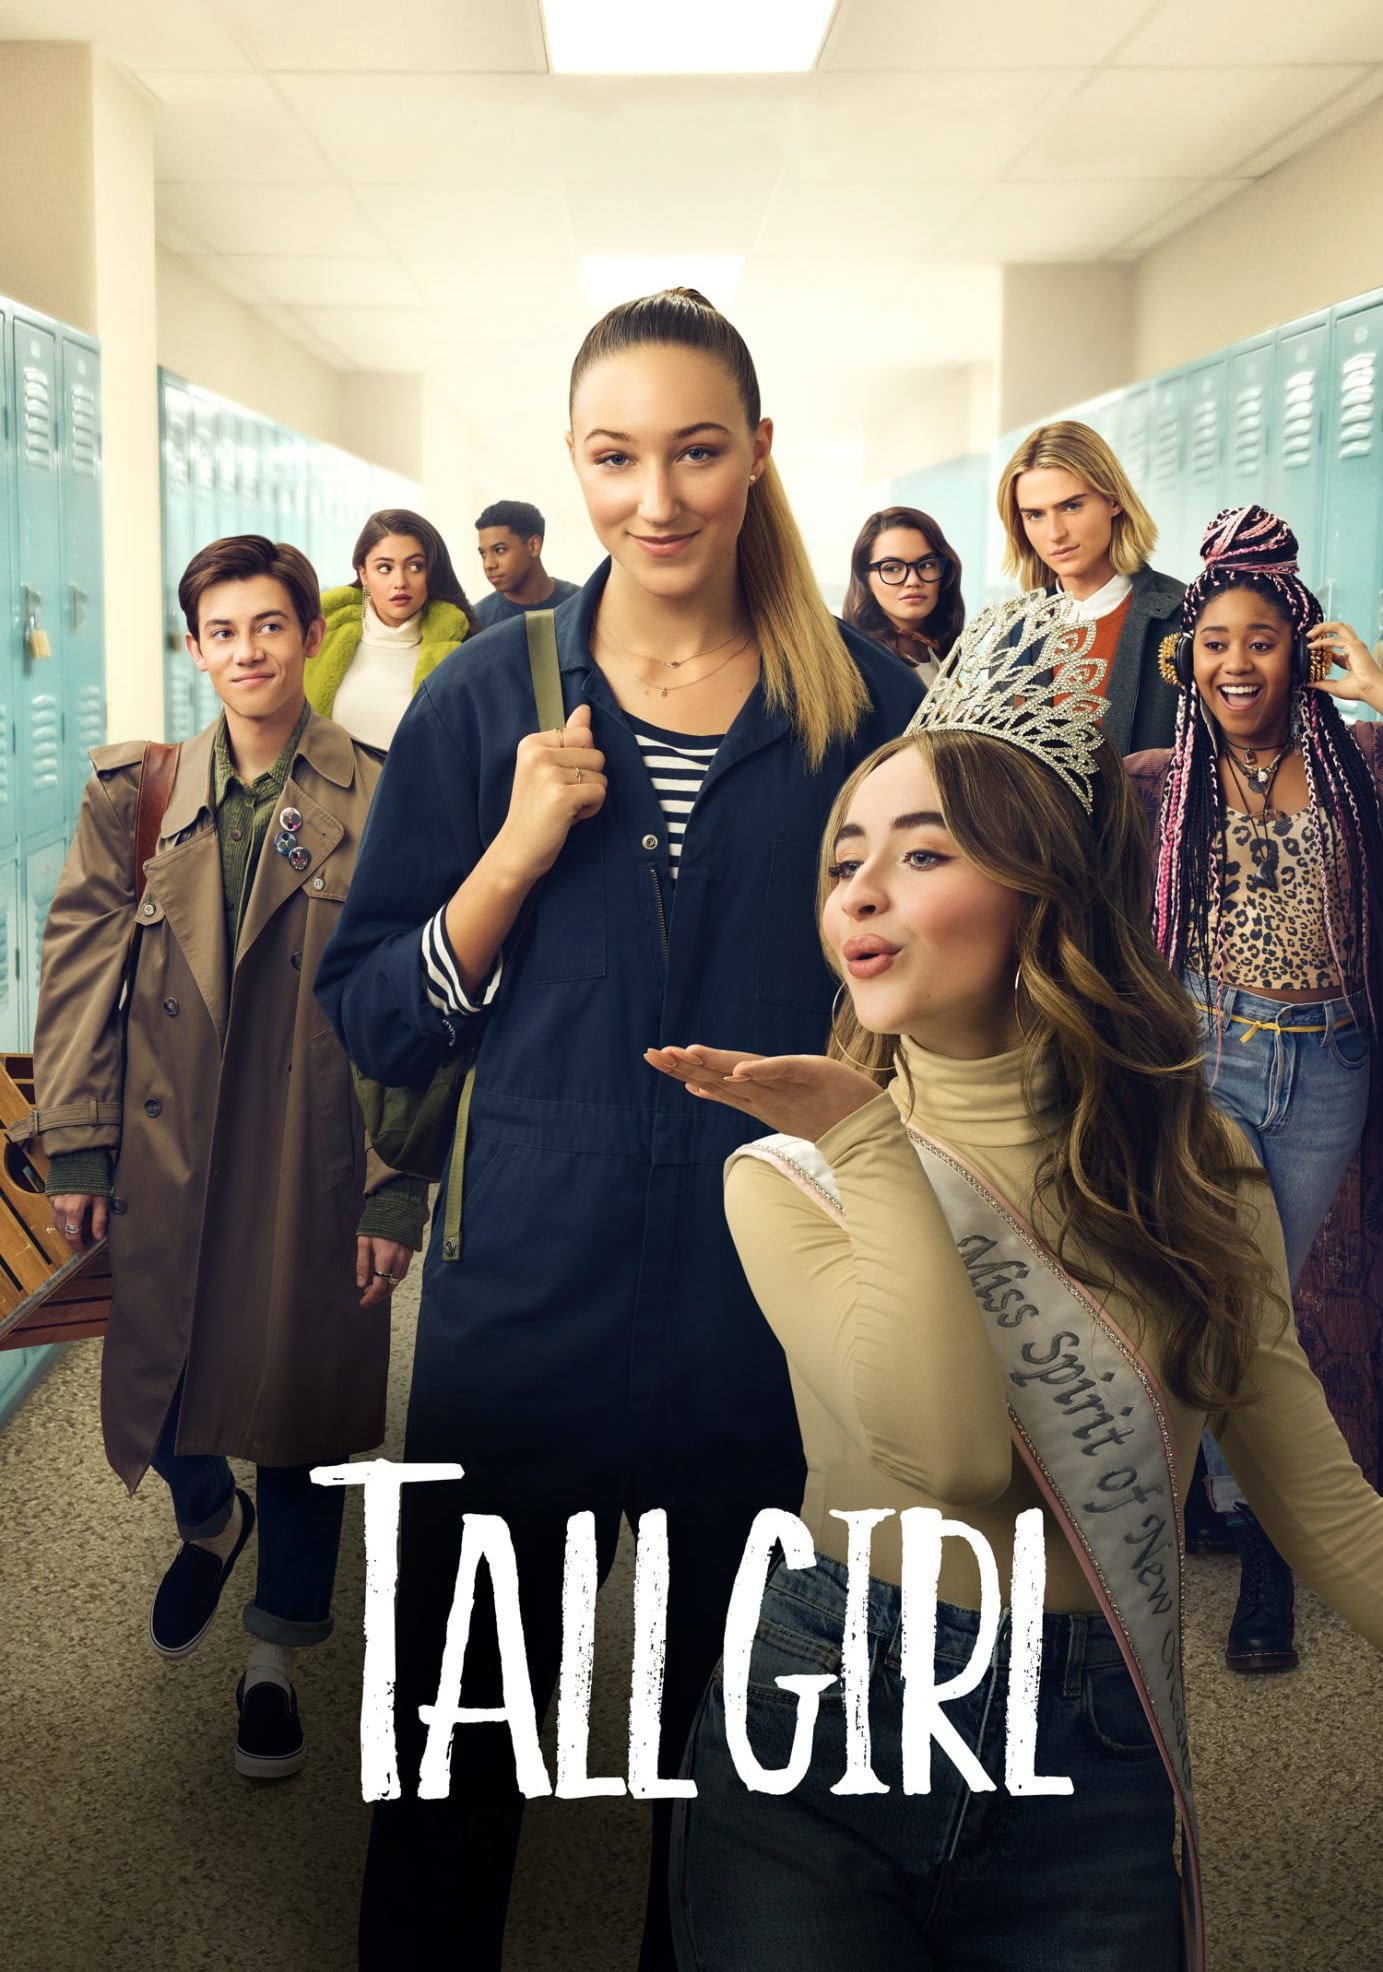 Poster for the movie "Tall Girl"